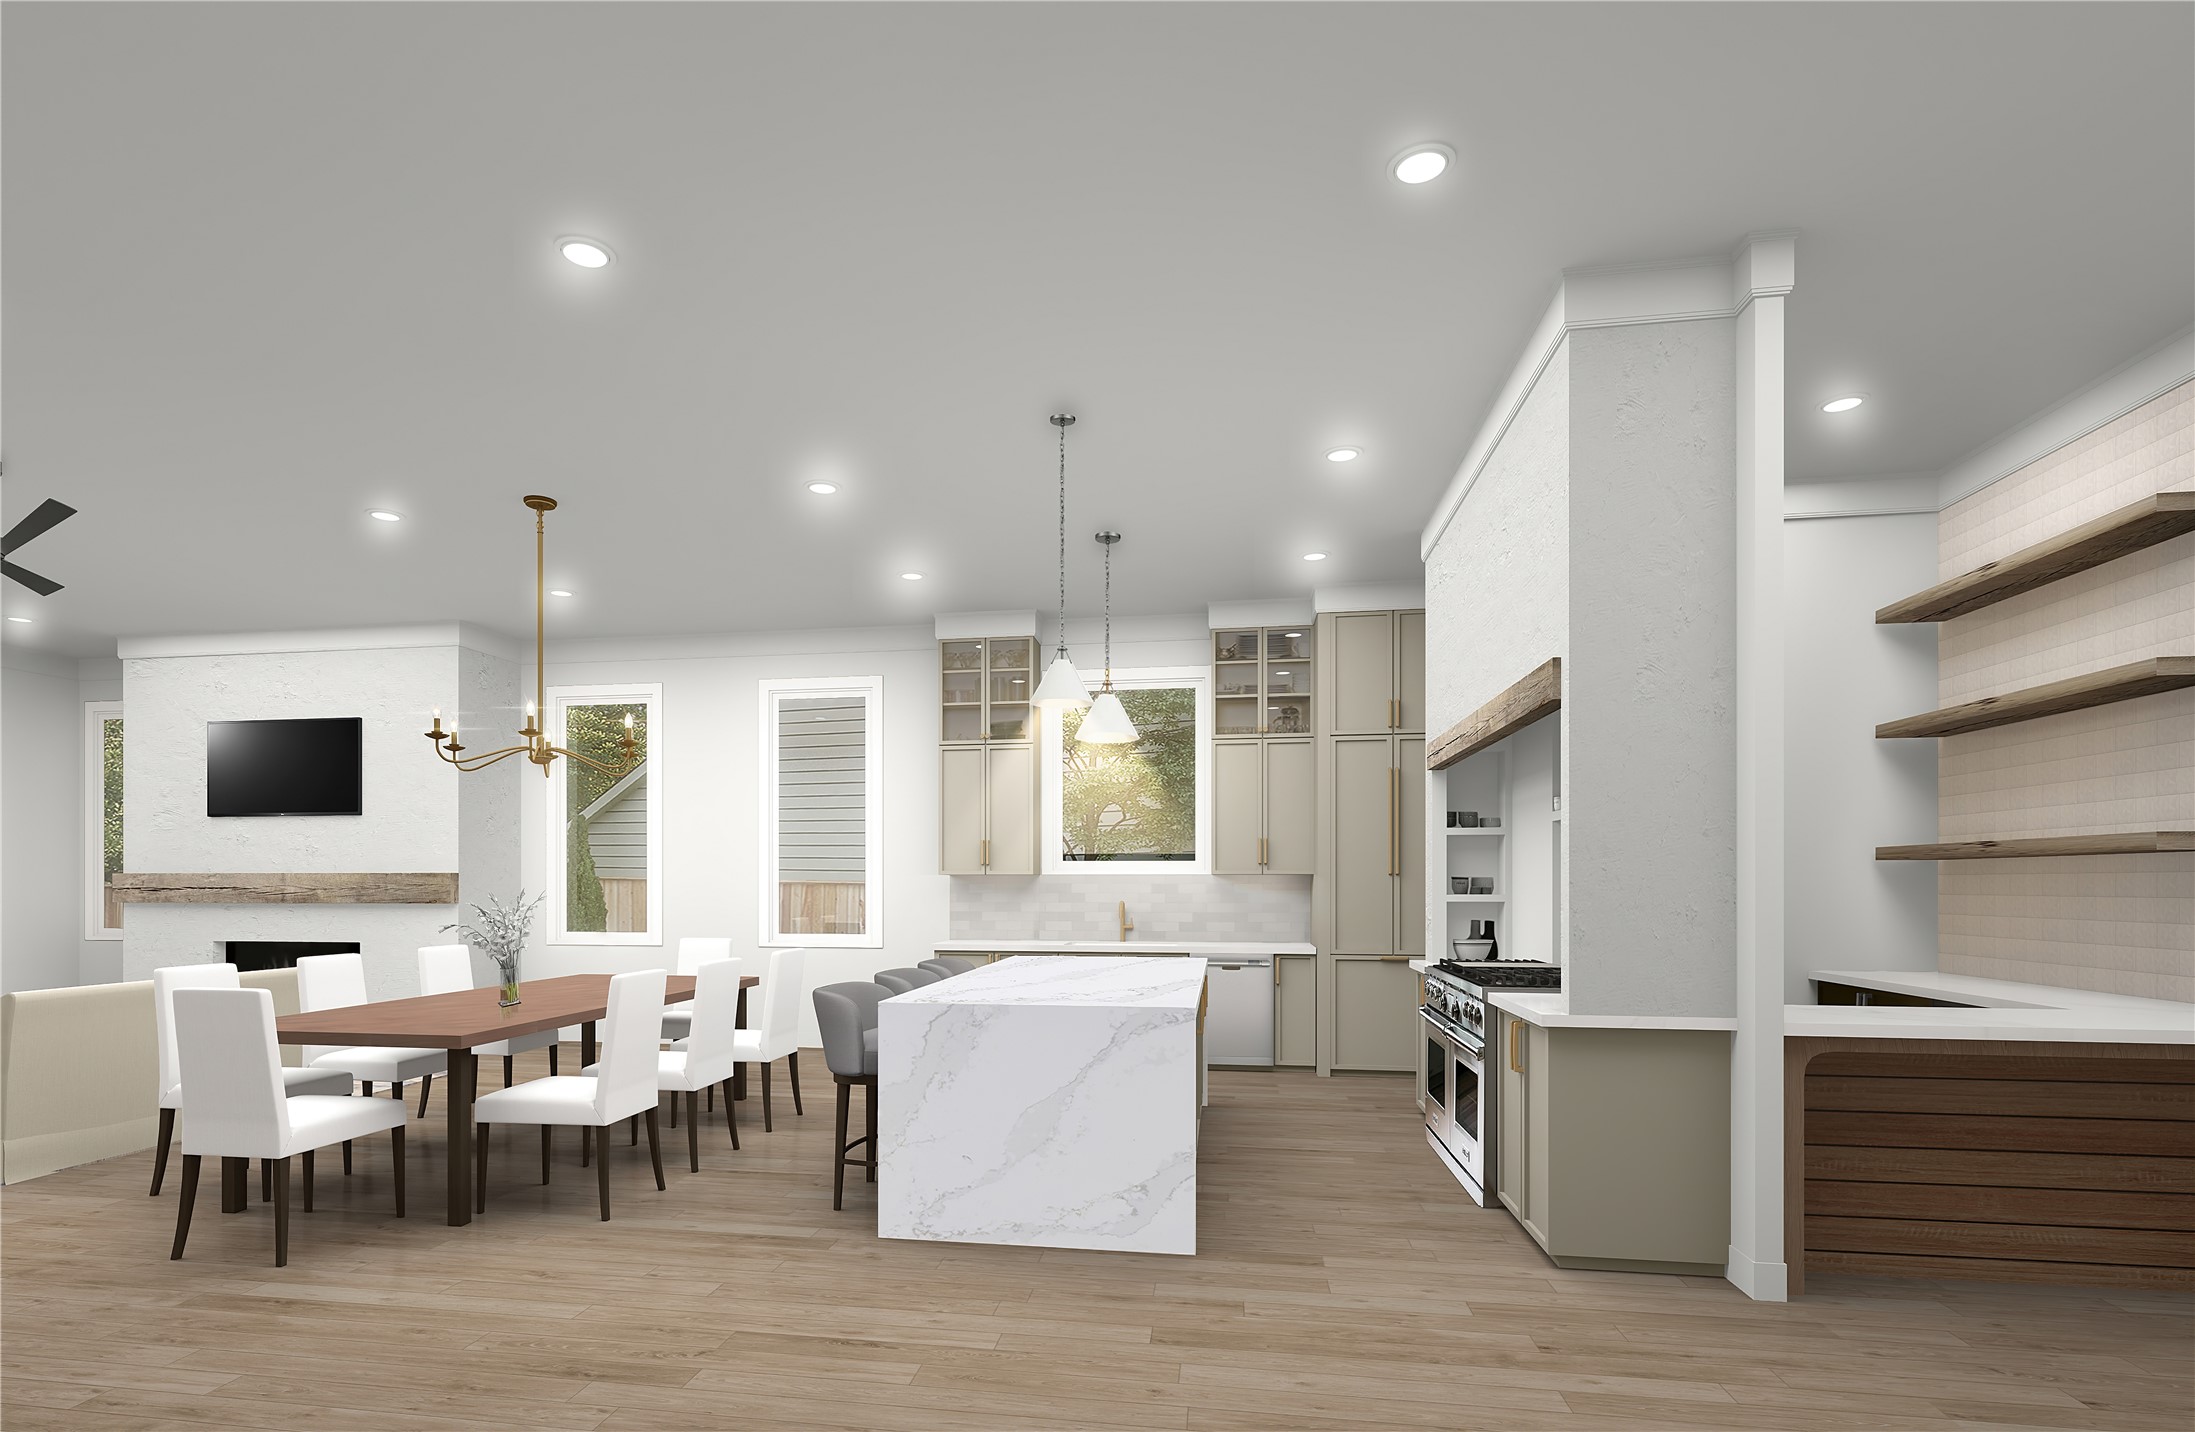 Incredible open concept floor plan! (Proposed kitchen / dining / living / bar)